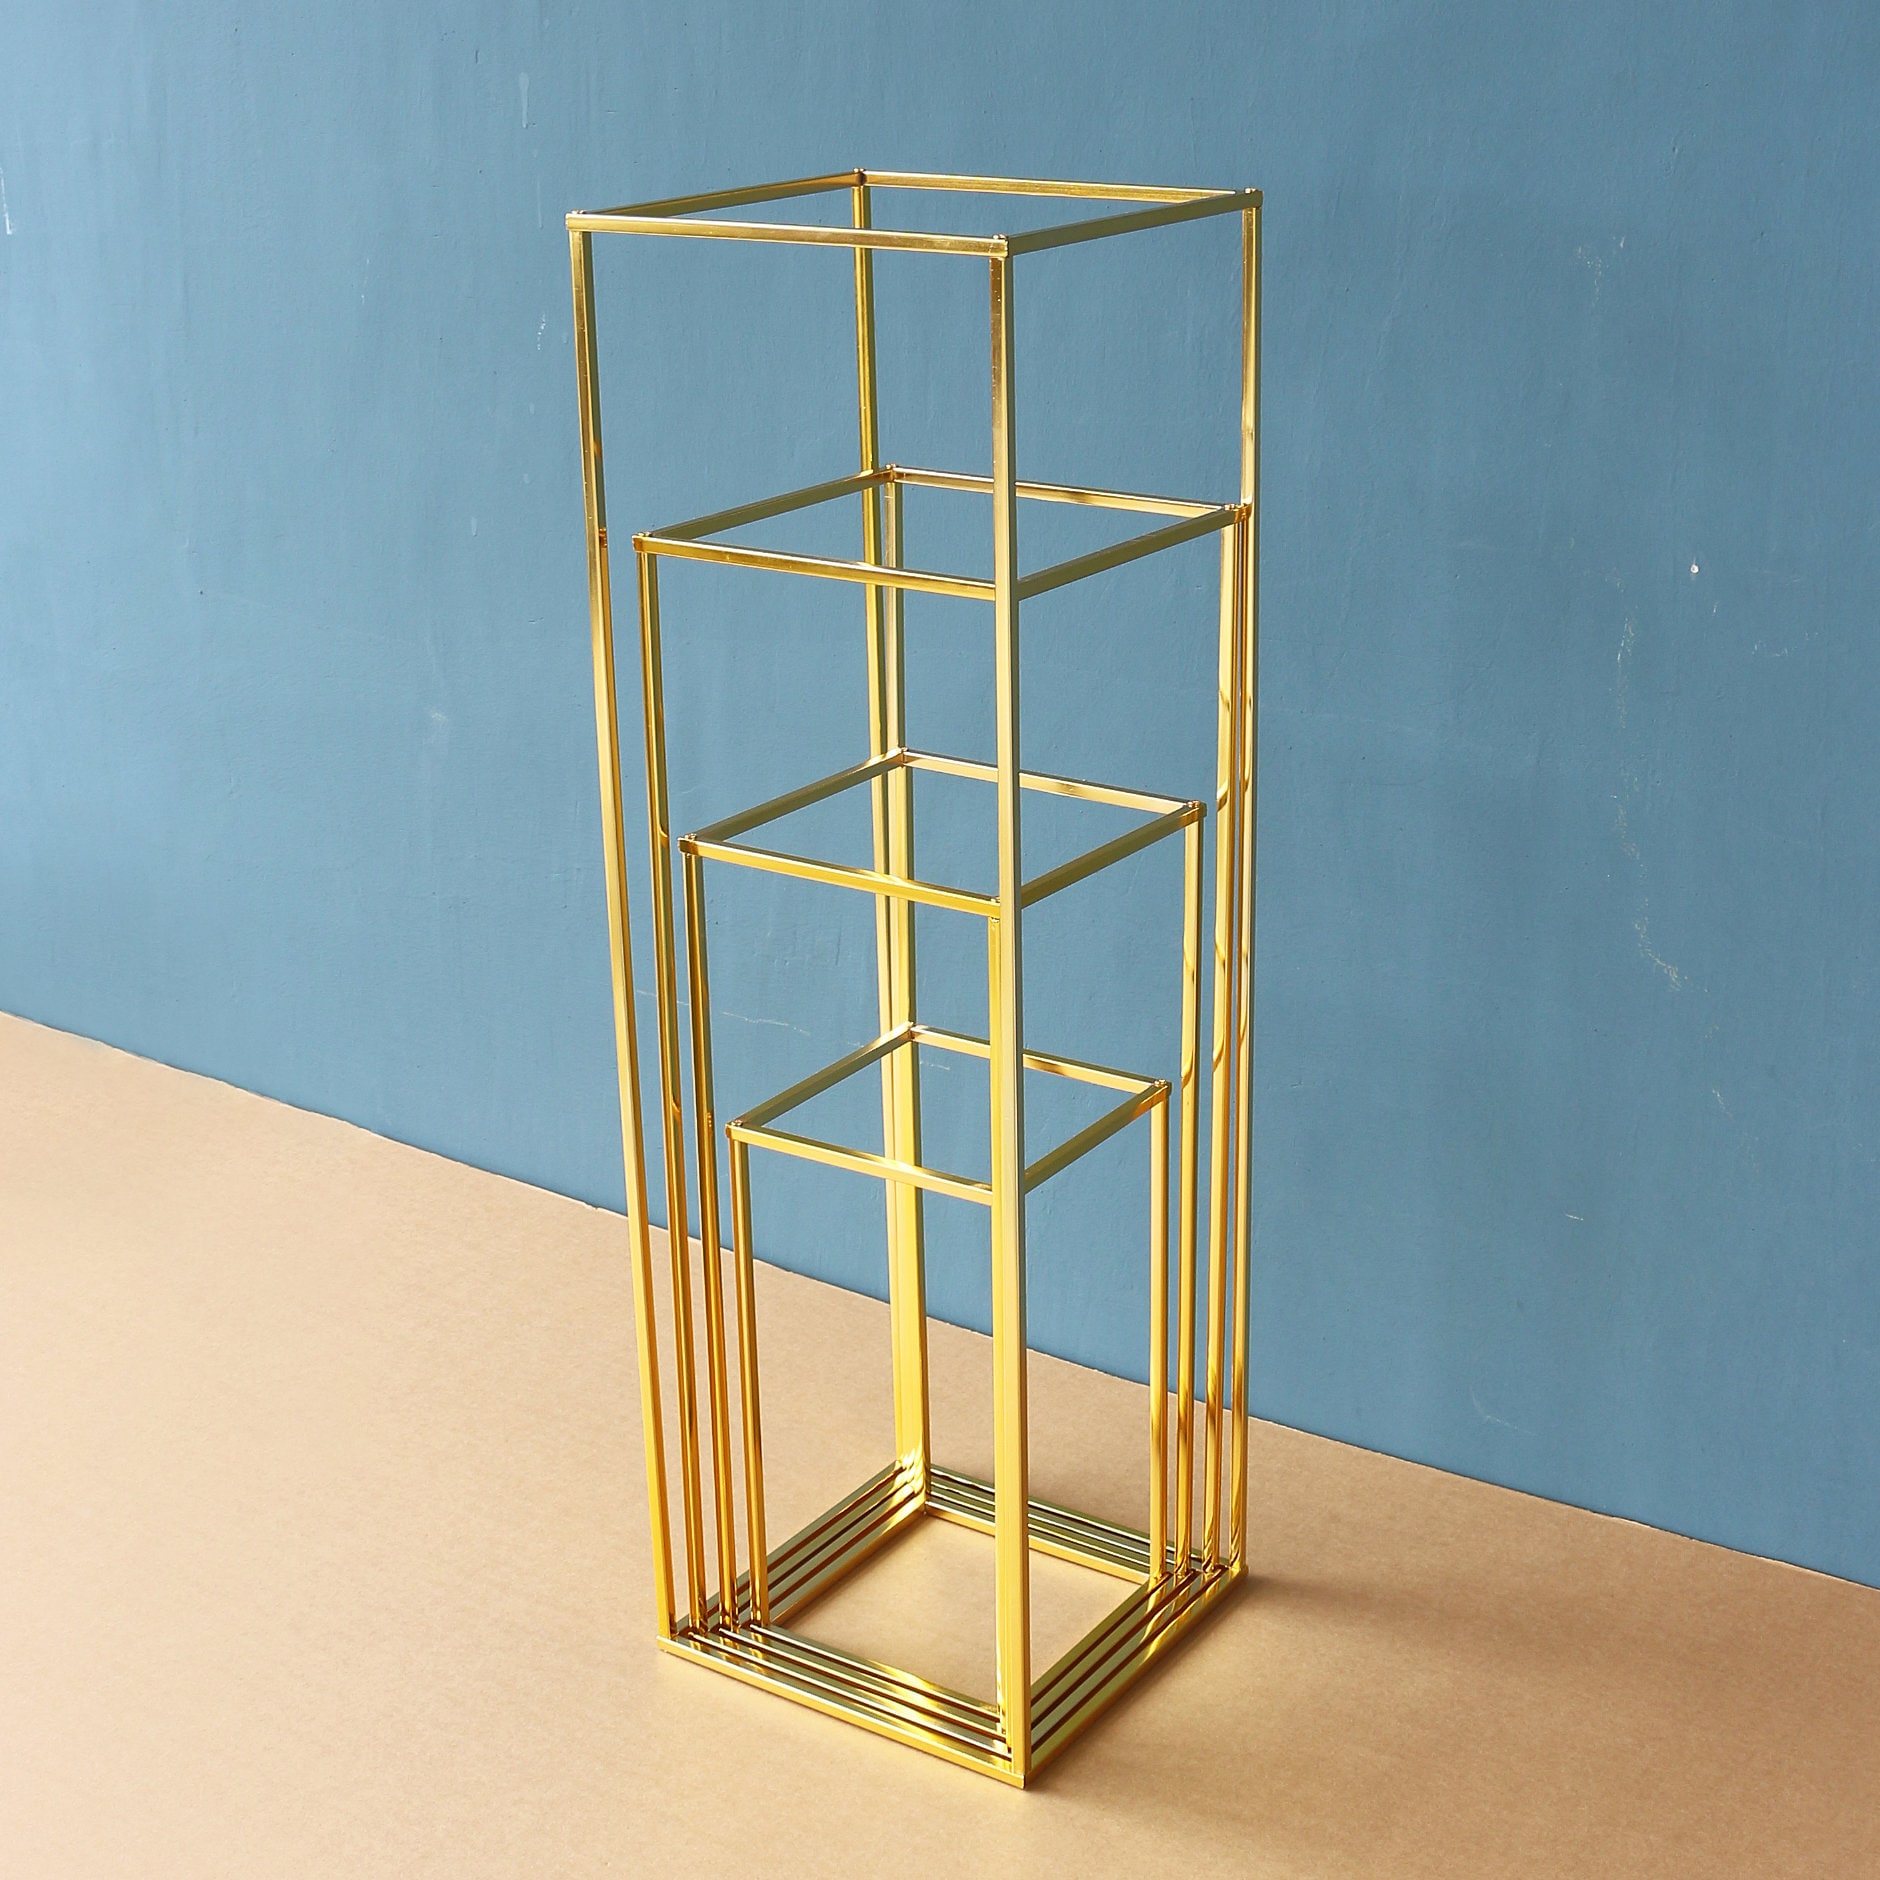 LatestNo Flowers Including Wedding Occassion Gold Plating Metal Floral Stand  Geometric Road Lead Electroplate Square Flower Stand Deco577 From  Weddingdecorworld, $25.05